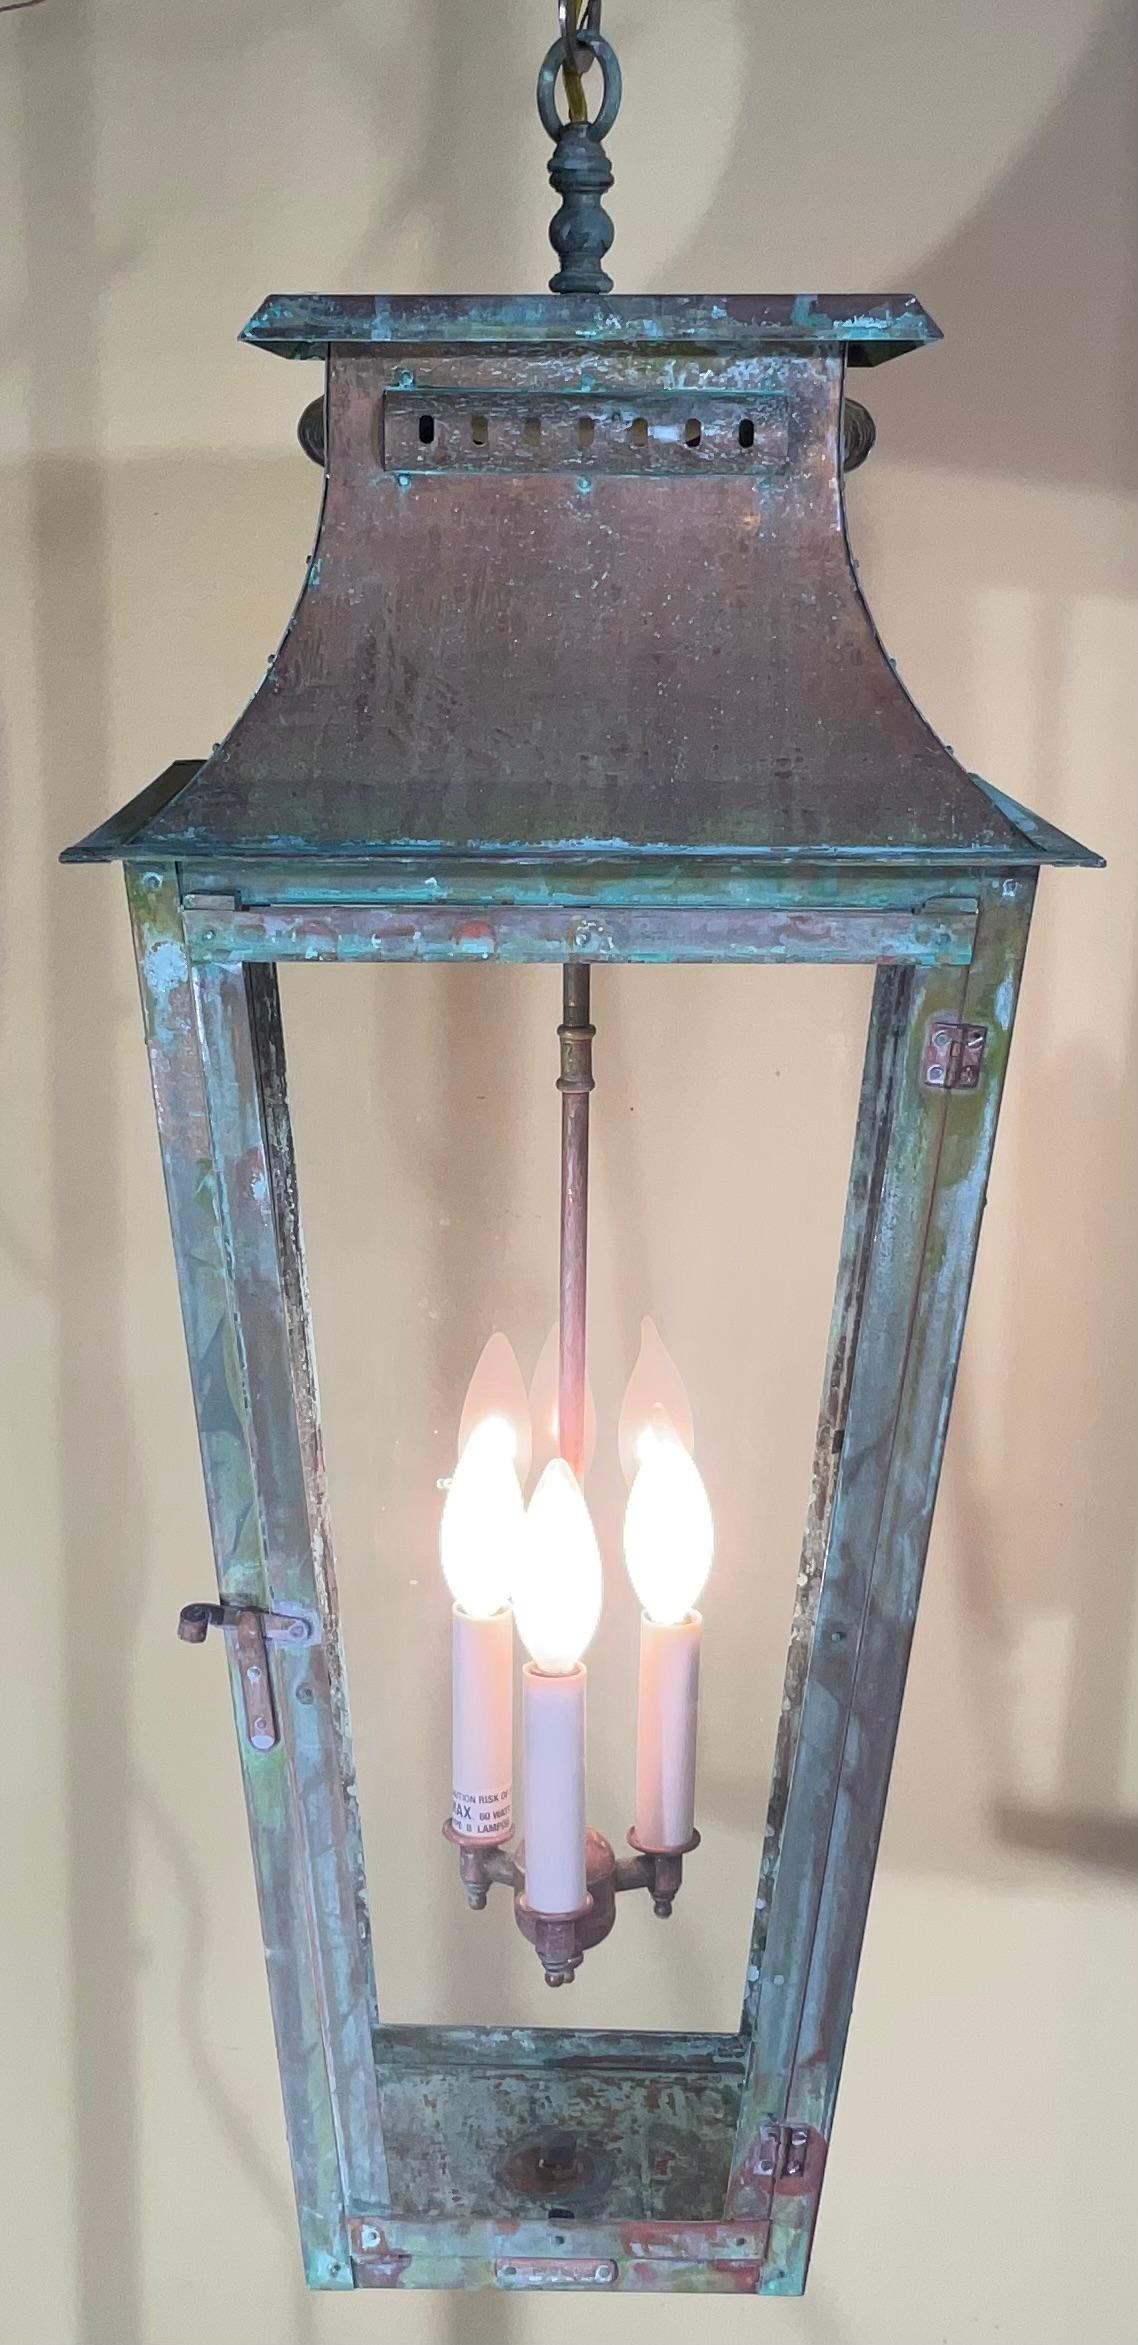 Quality handcrafted of solid copper lantern , beautiful patina ,with three 60/watt lights.
Electrified and ready to light. Beautiful oxidization patina.
Made in the US 
Could be used in wet location.